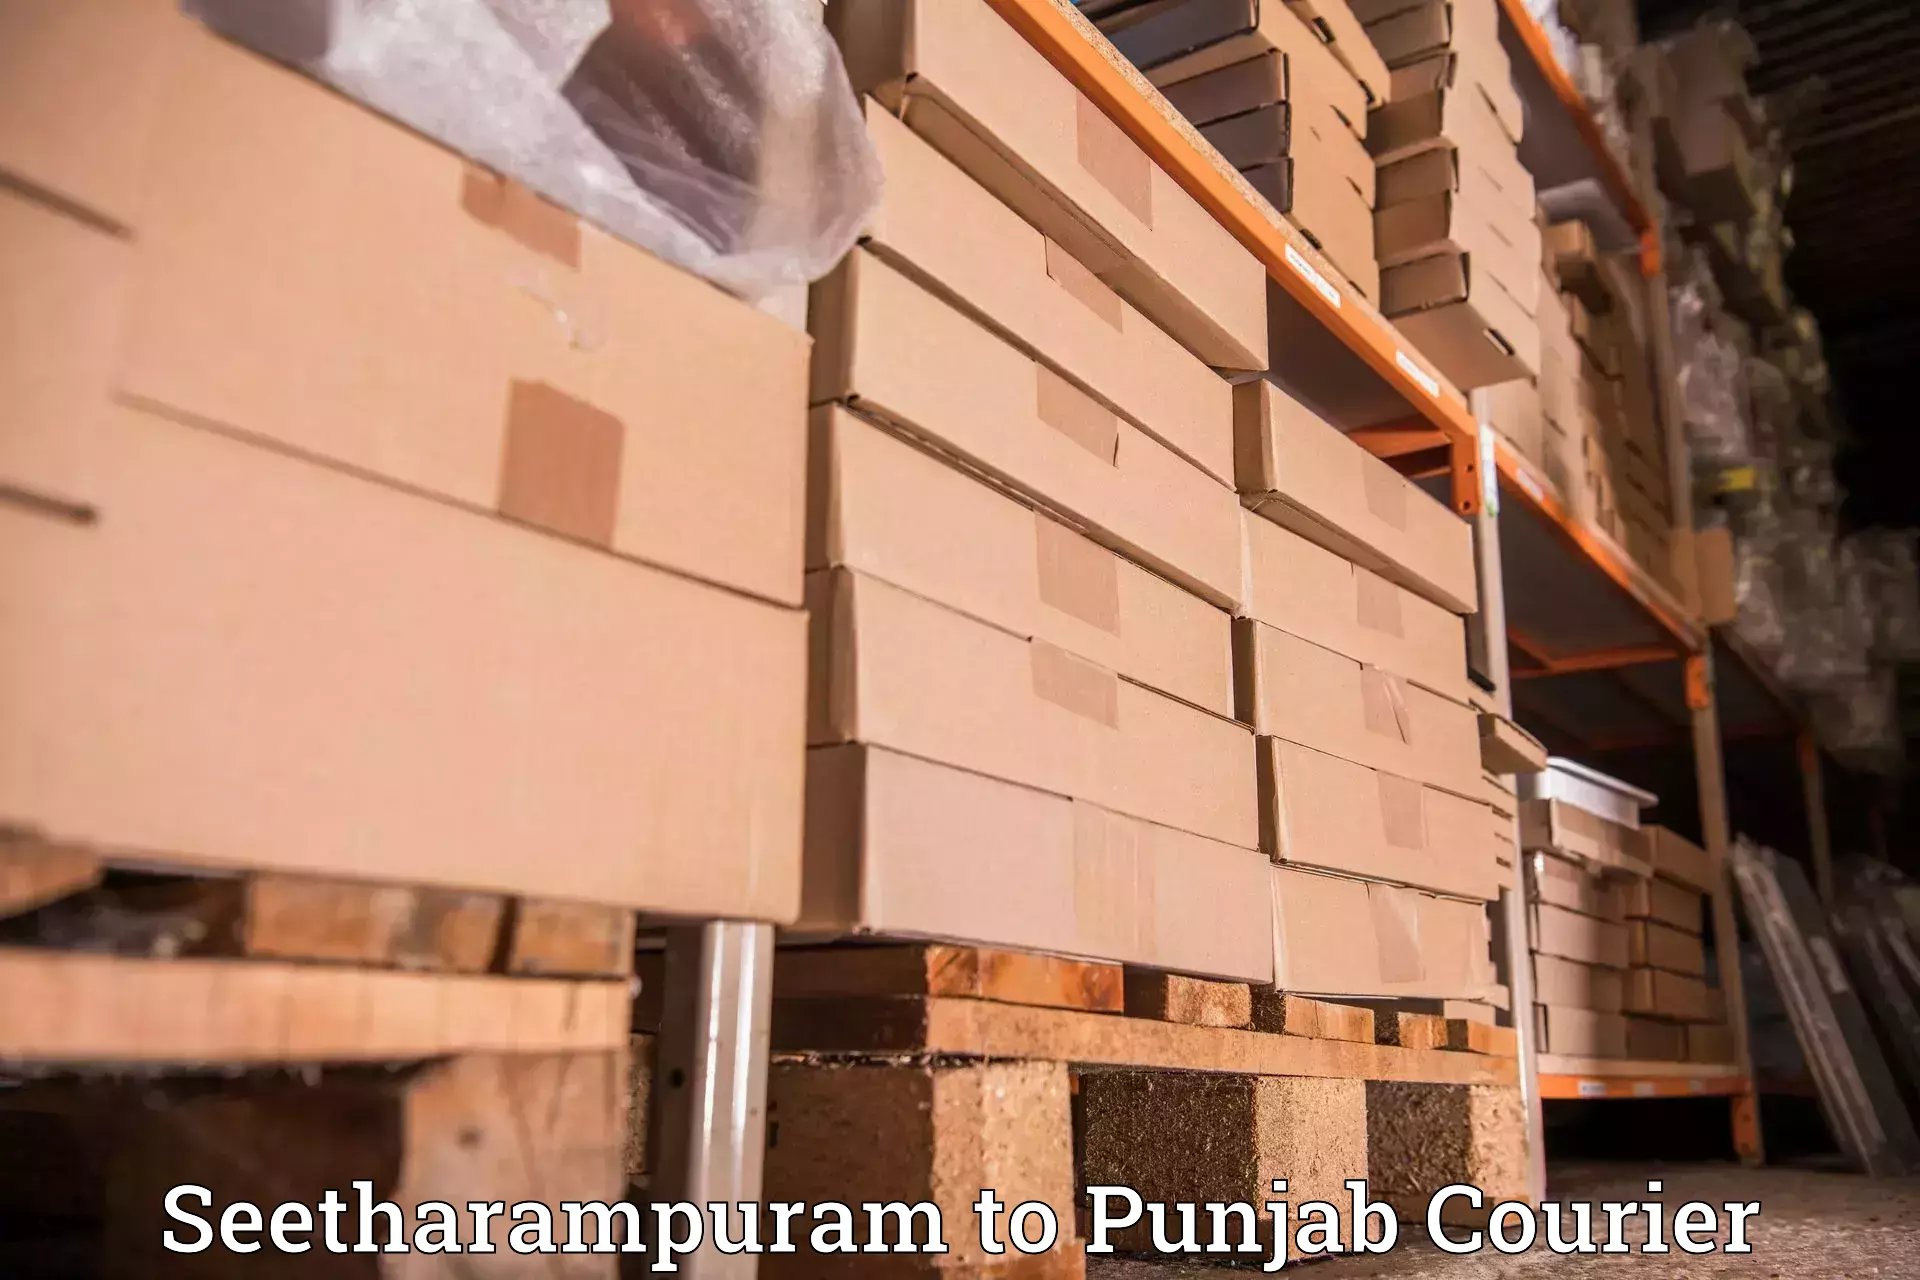 User-friendly delivery service Seetharampuram to Punjab